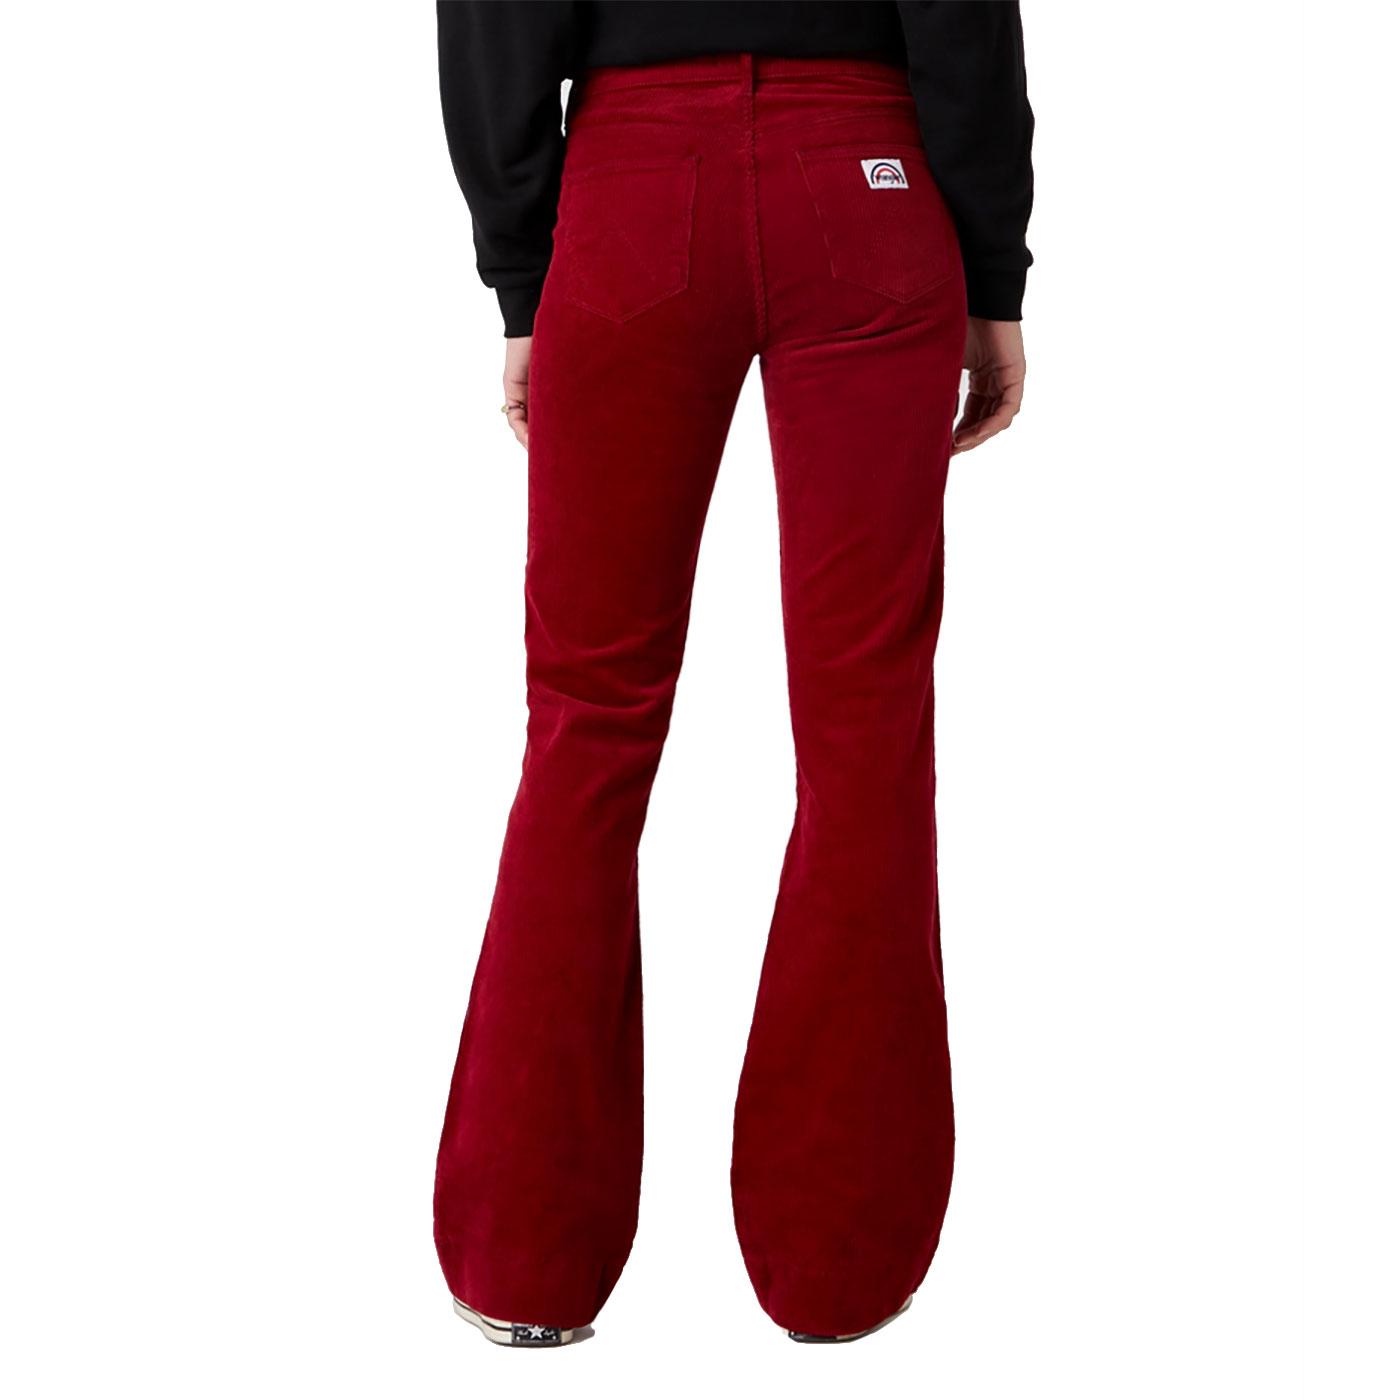 WRANGLER Retro Seventies Cord Flared Jeans in Rumba Red